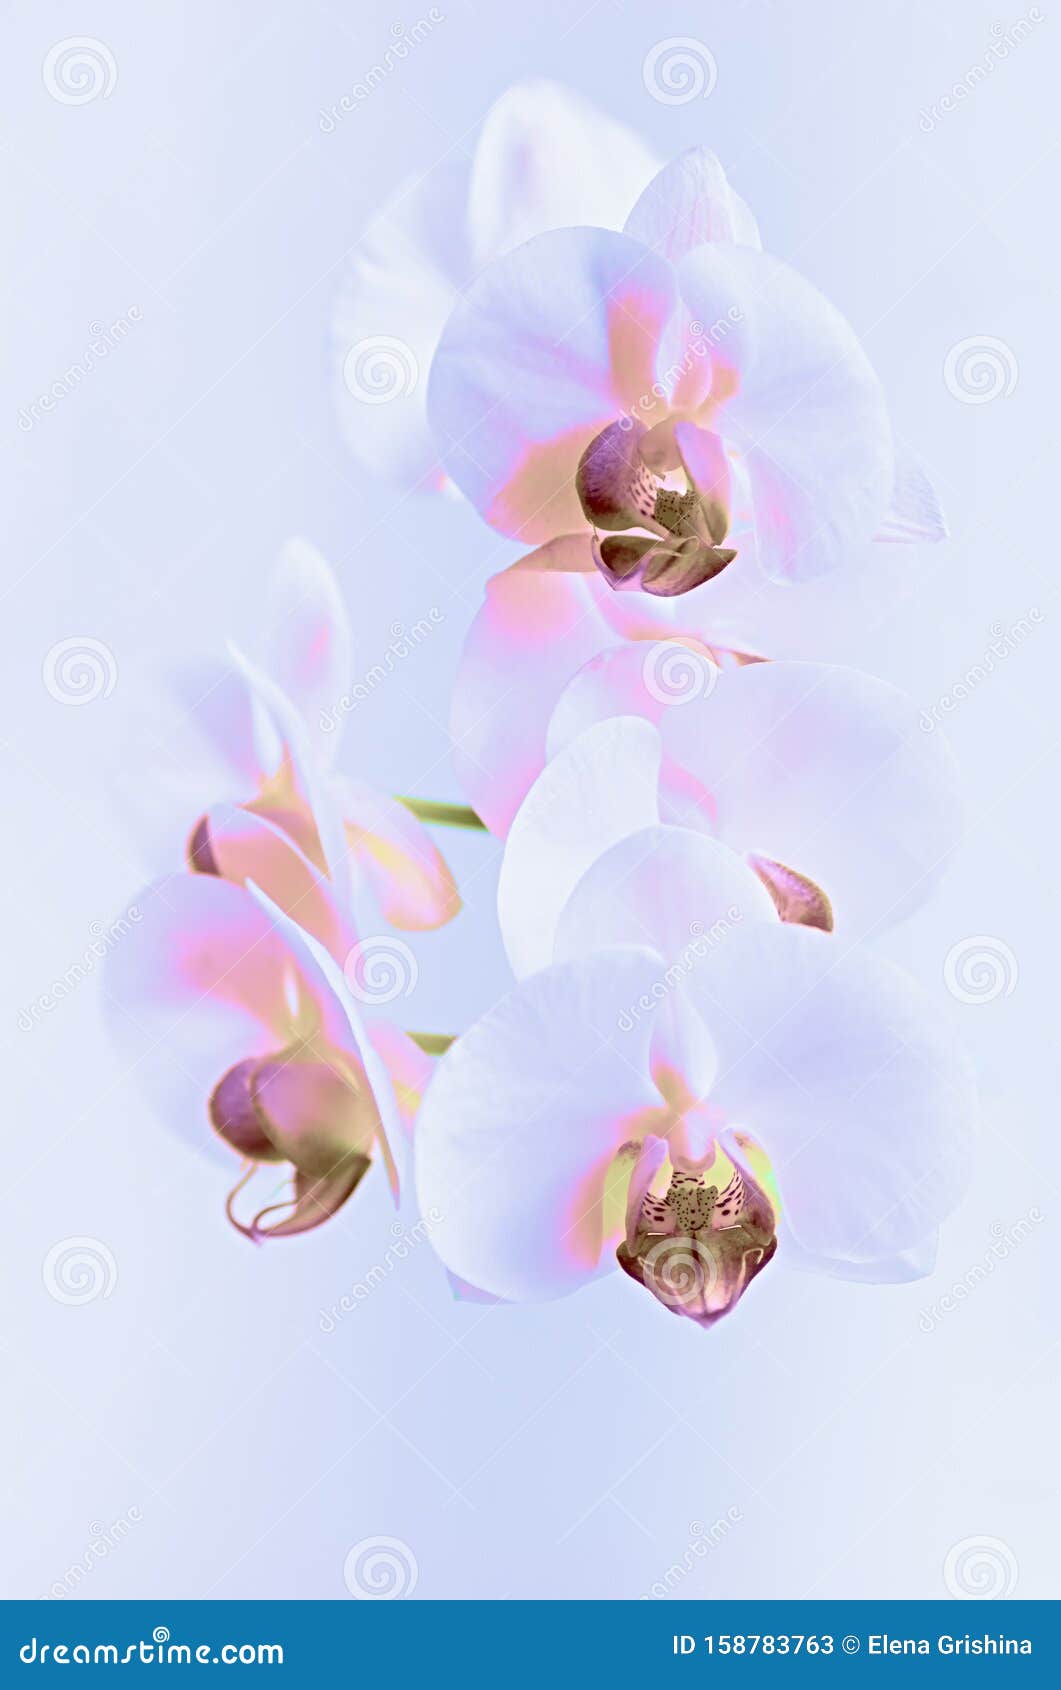 White Orchid in a Neon Light. Close-up Stock Image - Image of valentine,  design: 158783763